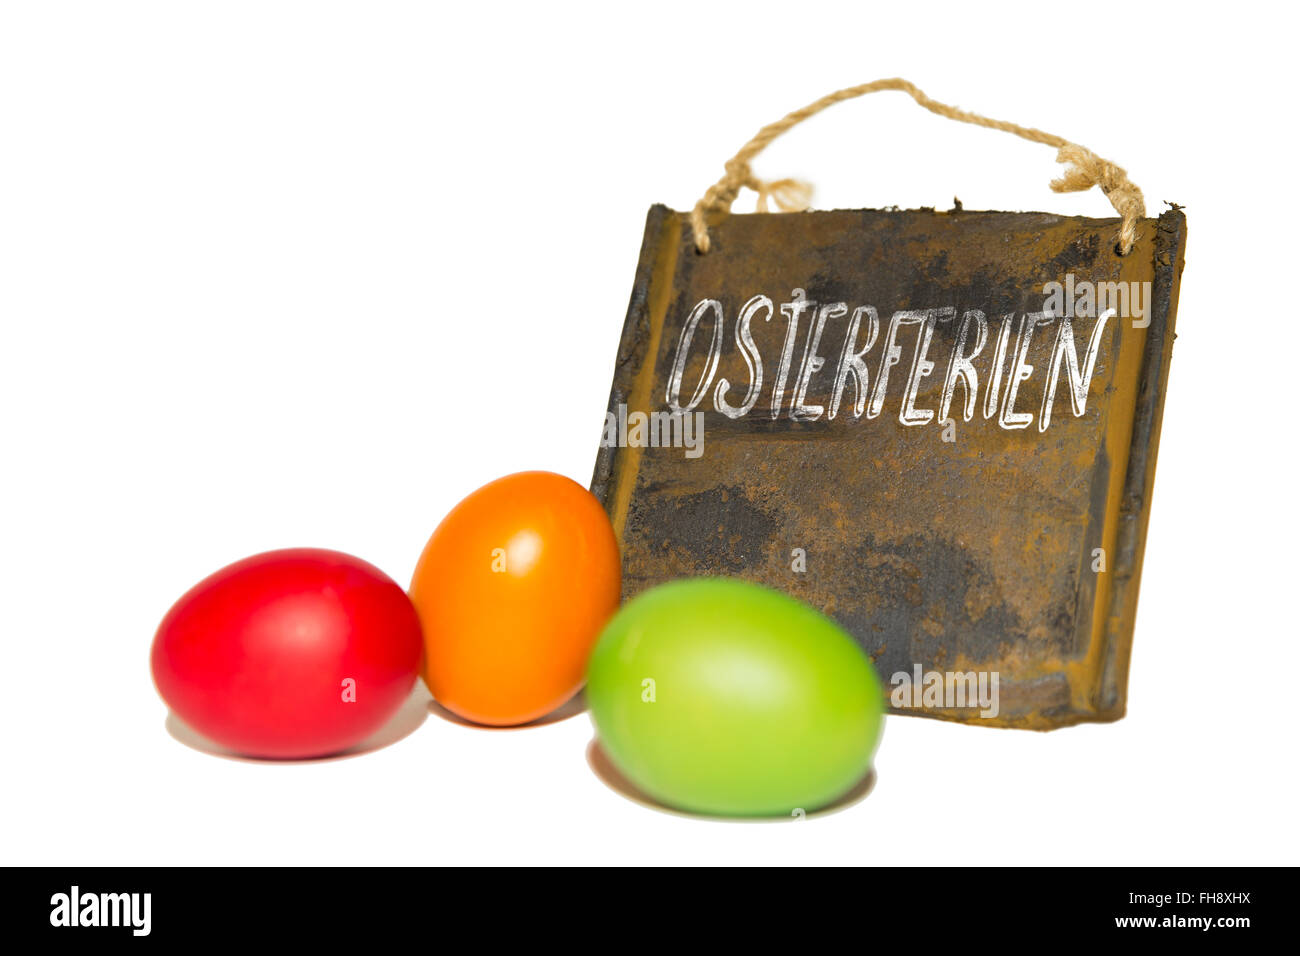 rustic sign with german word osterferien, which means easter vacation Stock Photo